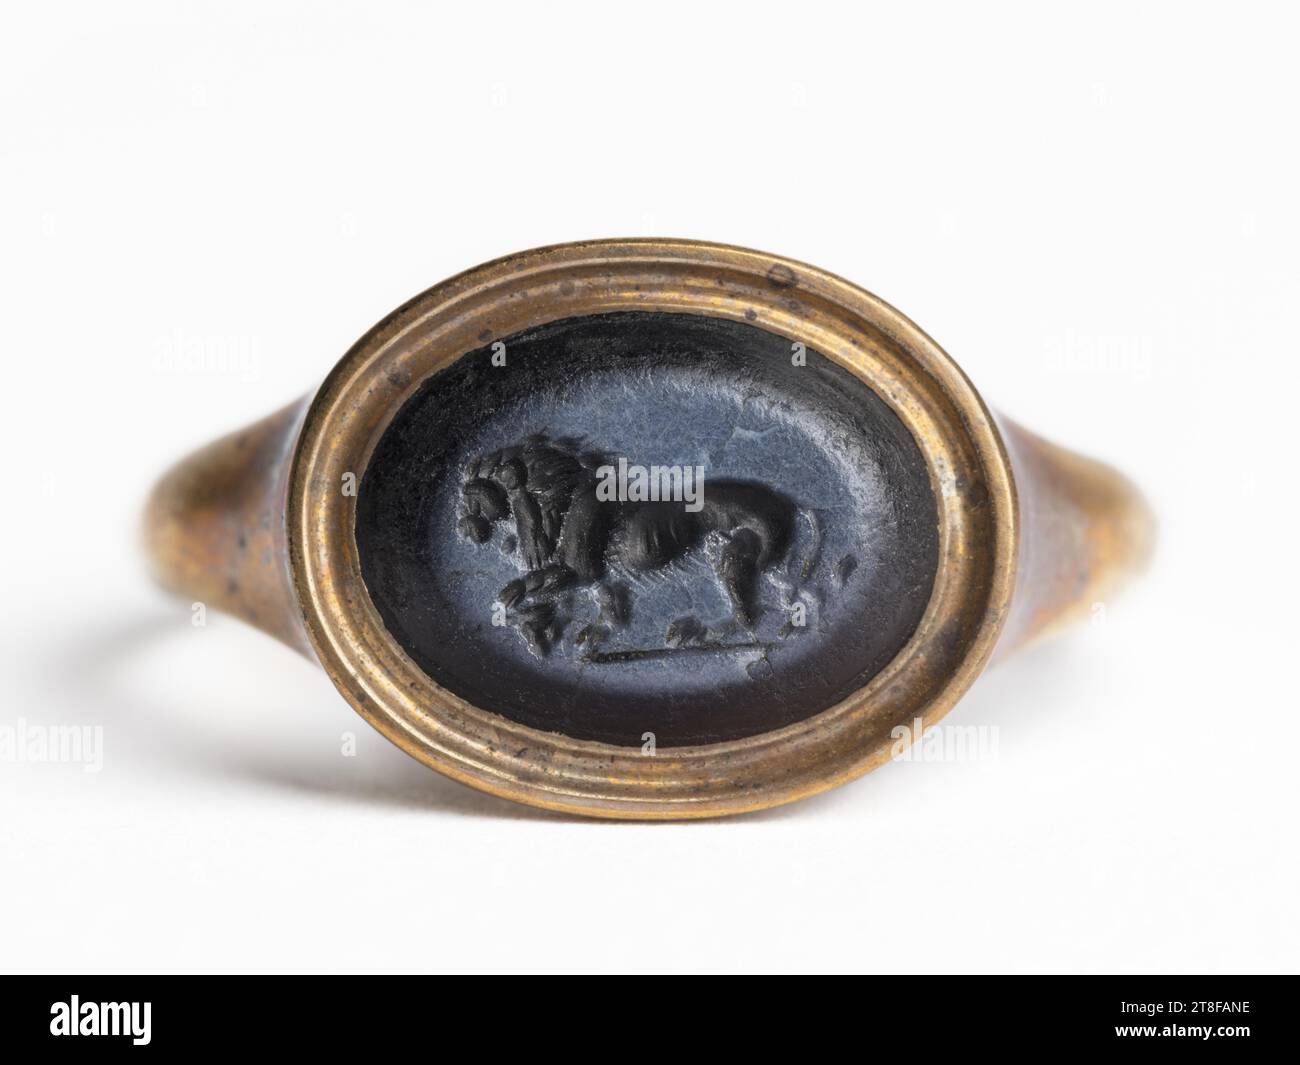 Lion resting its paw on a bull's head, No earlier than 200 - No later than 400, Jewelry, Ring, Finger Ring, Gold Ring, Signet Ring, Ringstone, Metal, Gold, Gemstone, Onyx, Nicolo, Height 1.2 cm, Width 1.2 cm, Stonemasonry, Stonecutting, Roman, Imperial Period (27 BC - 476 Stock Photo